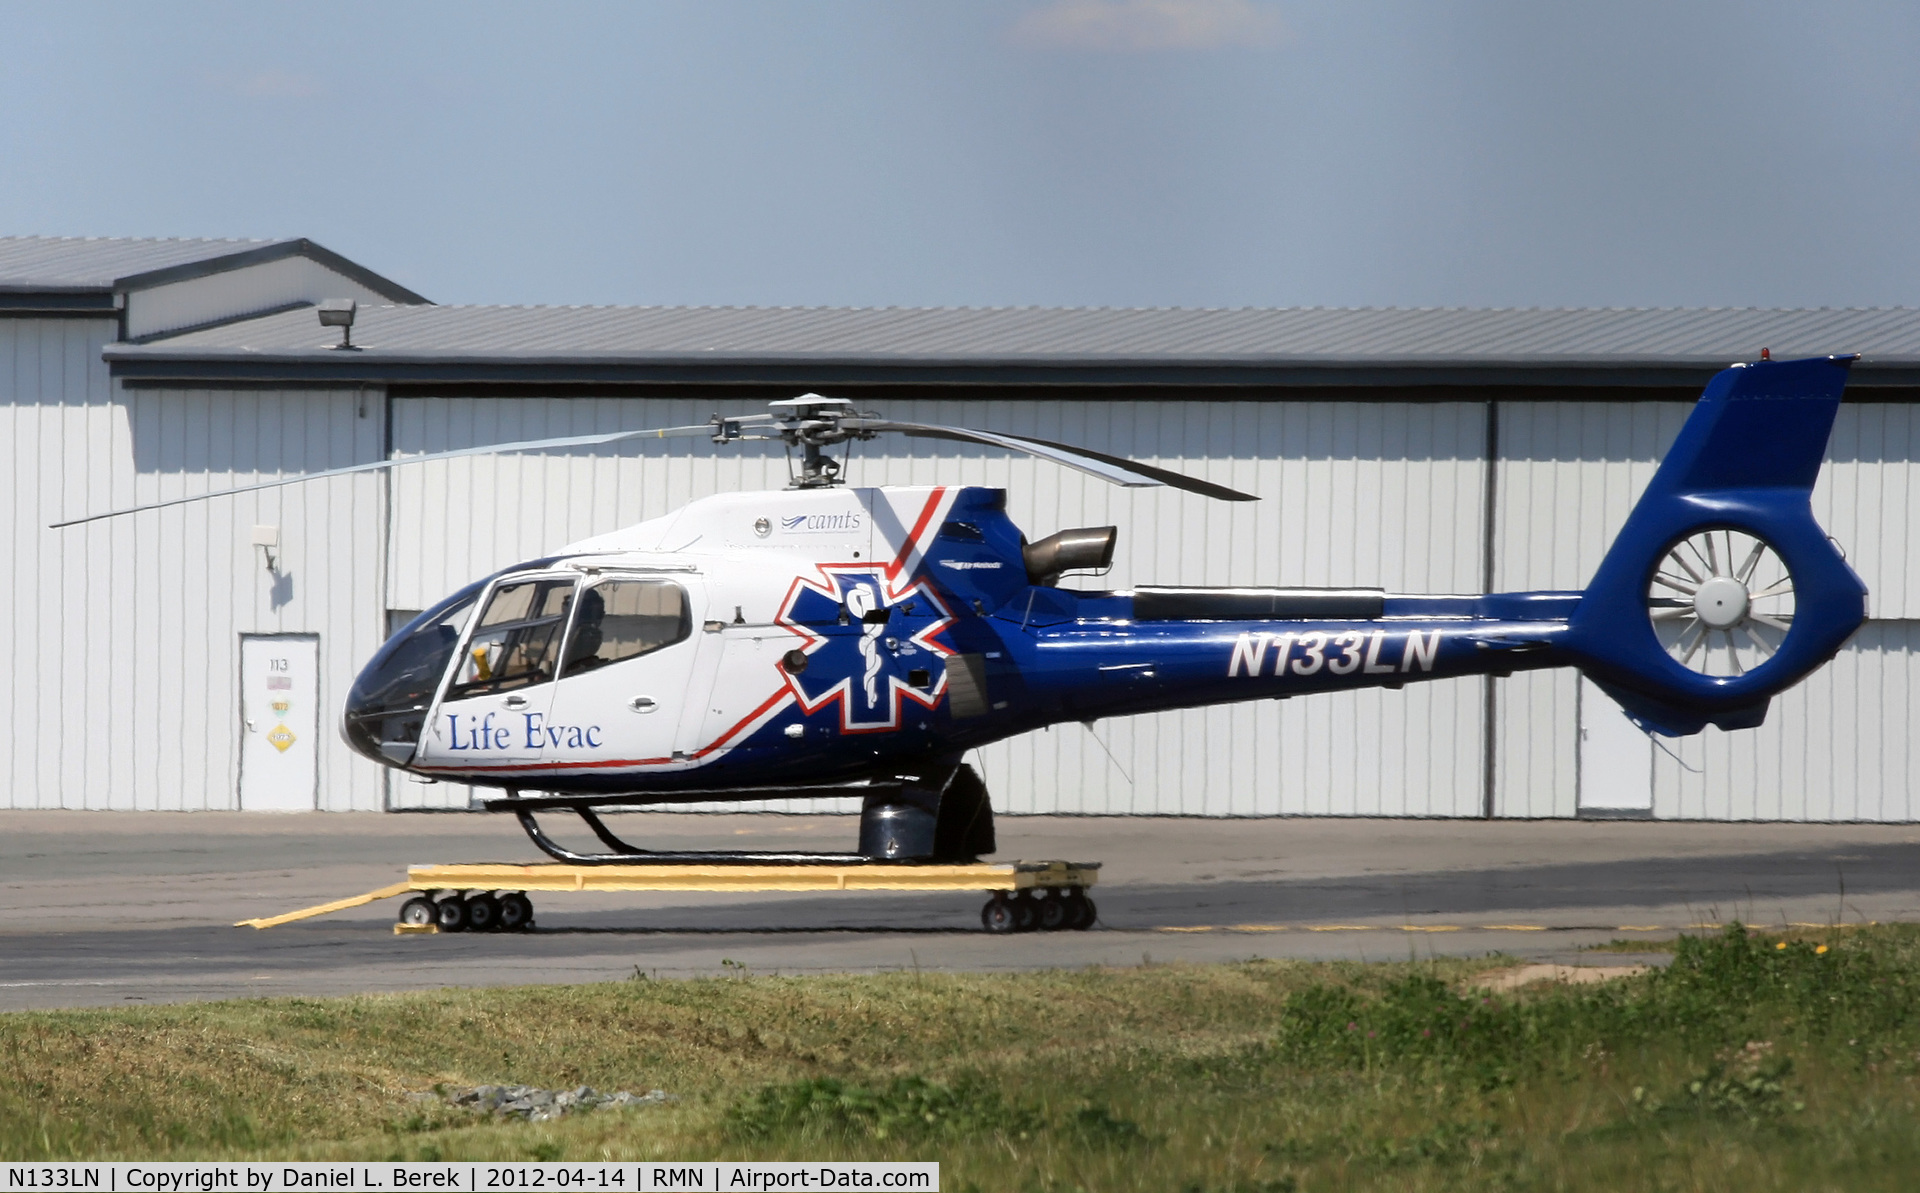 N133LN, 2005 Eurocopter EC-130B-4 (AS-350B-4) C/N 3983, When she is not engaged in rescue activity, this fine helicopter calls Stafford Regional home.